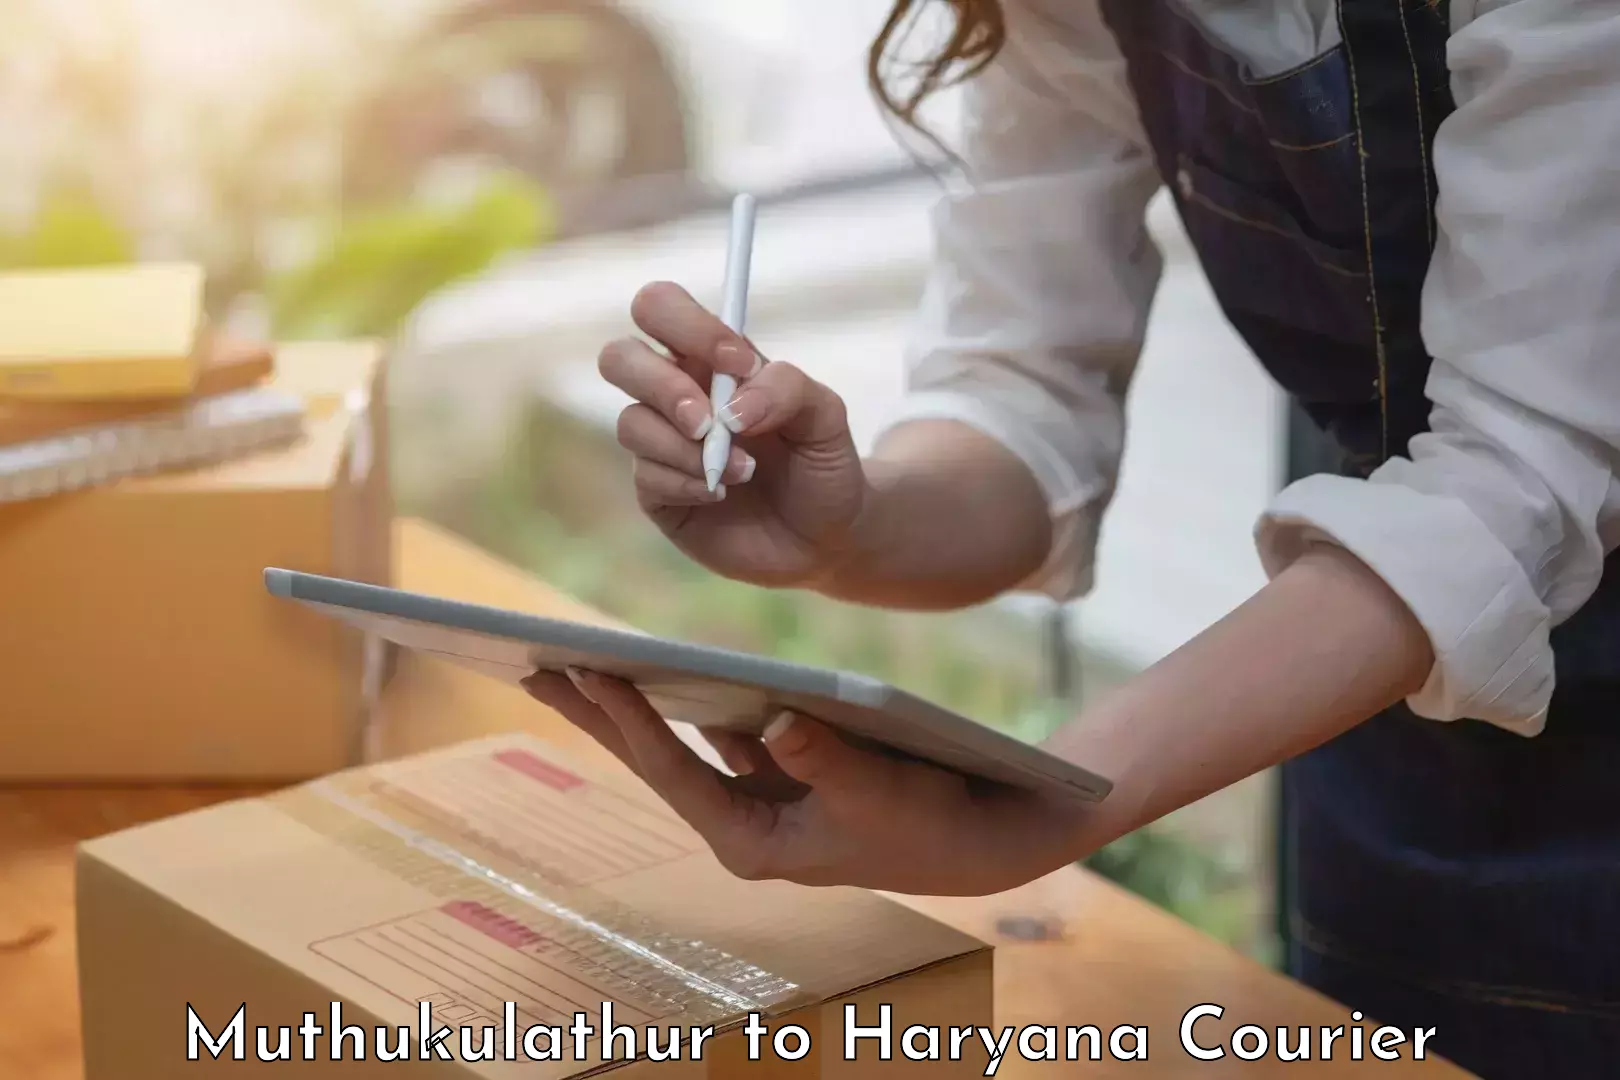 Furniture delivery service Muthukulathur to Narwana